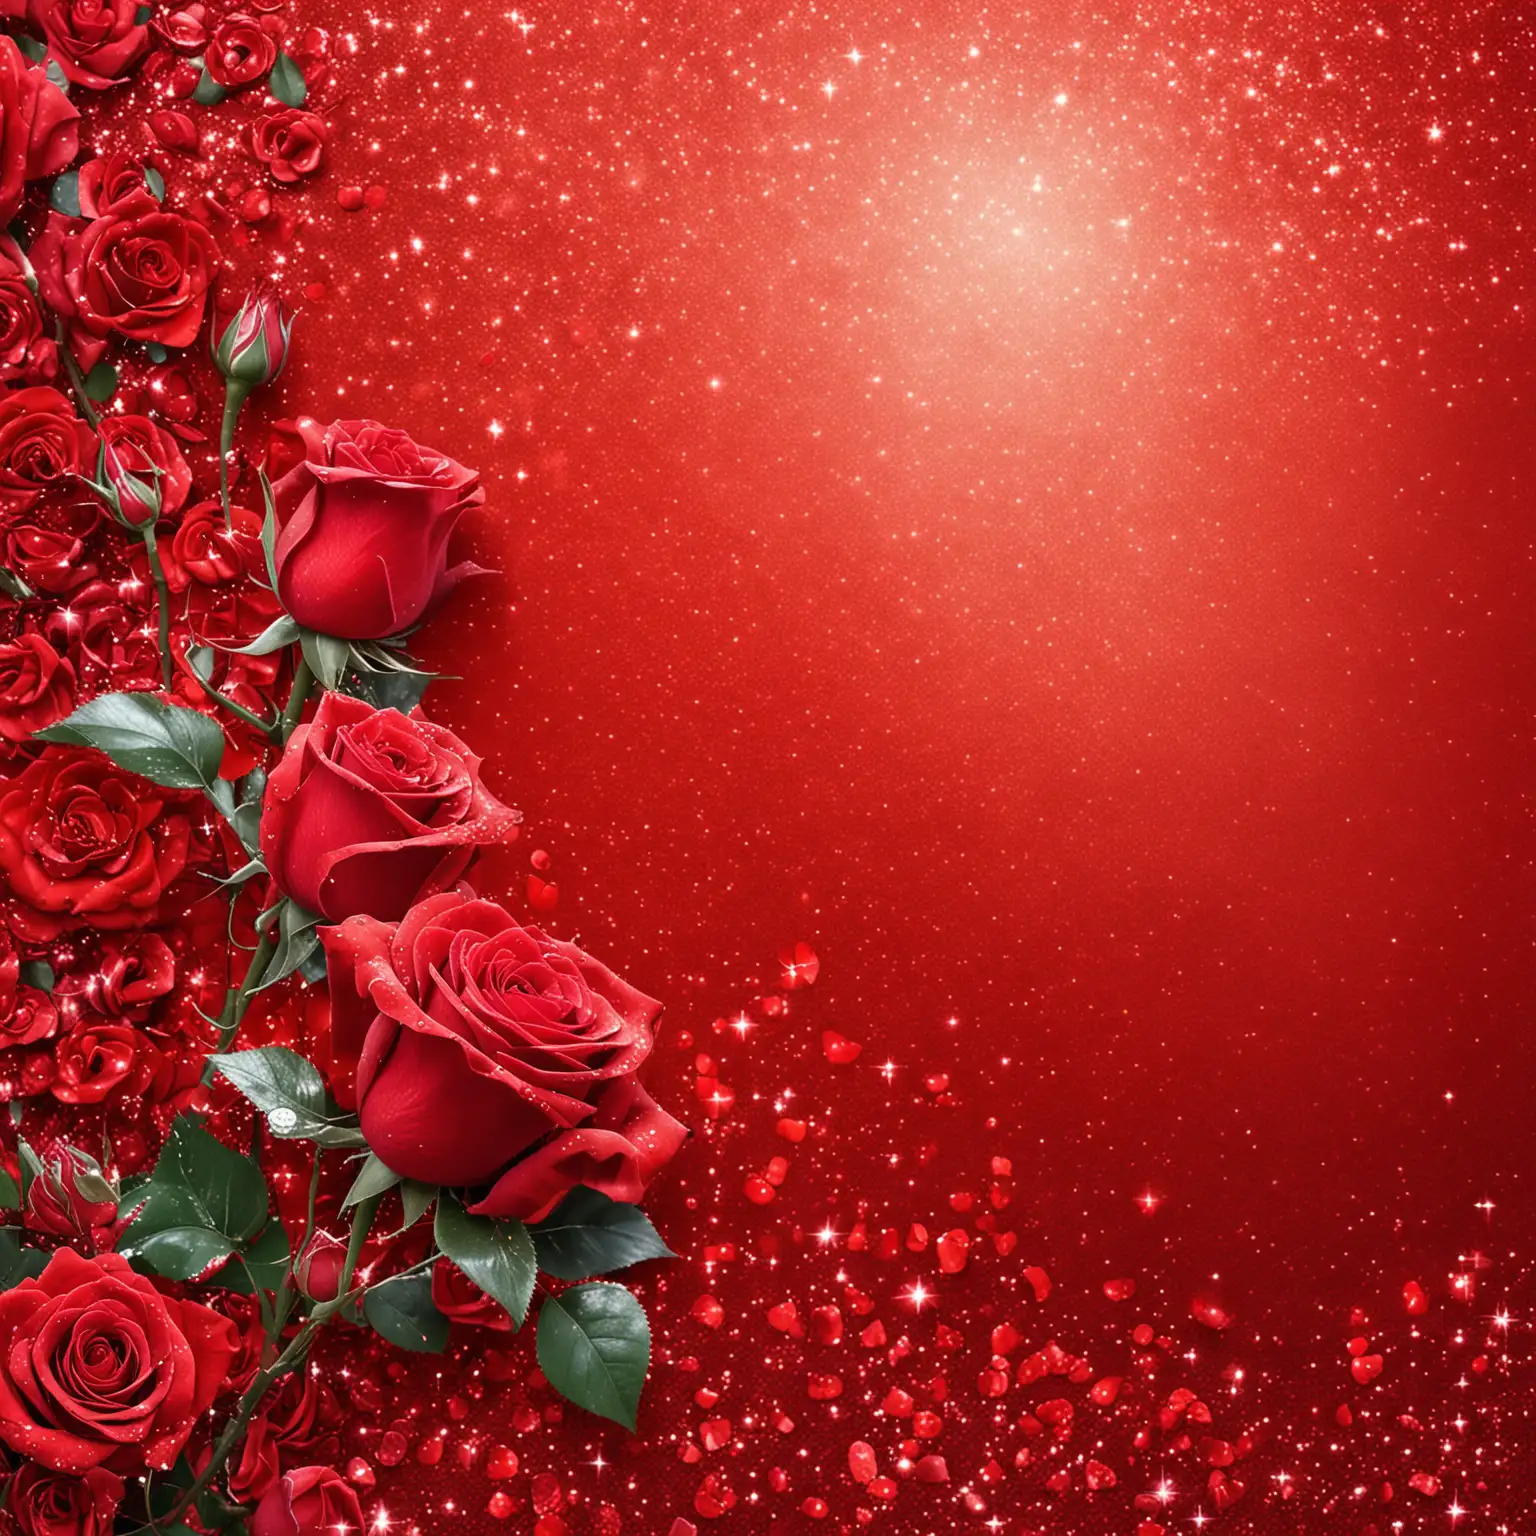 Glamorous RoseInfused Background with Glittering Sparkles